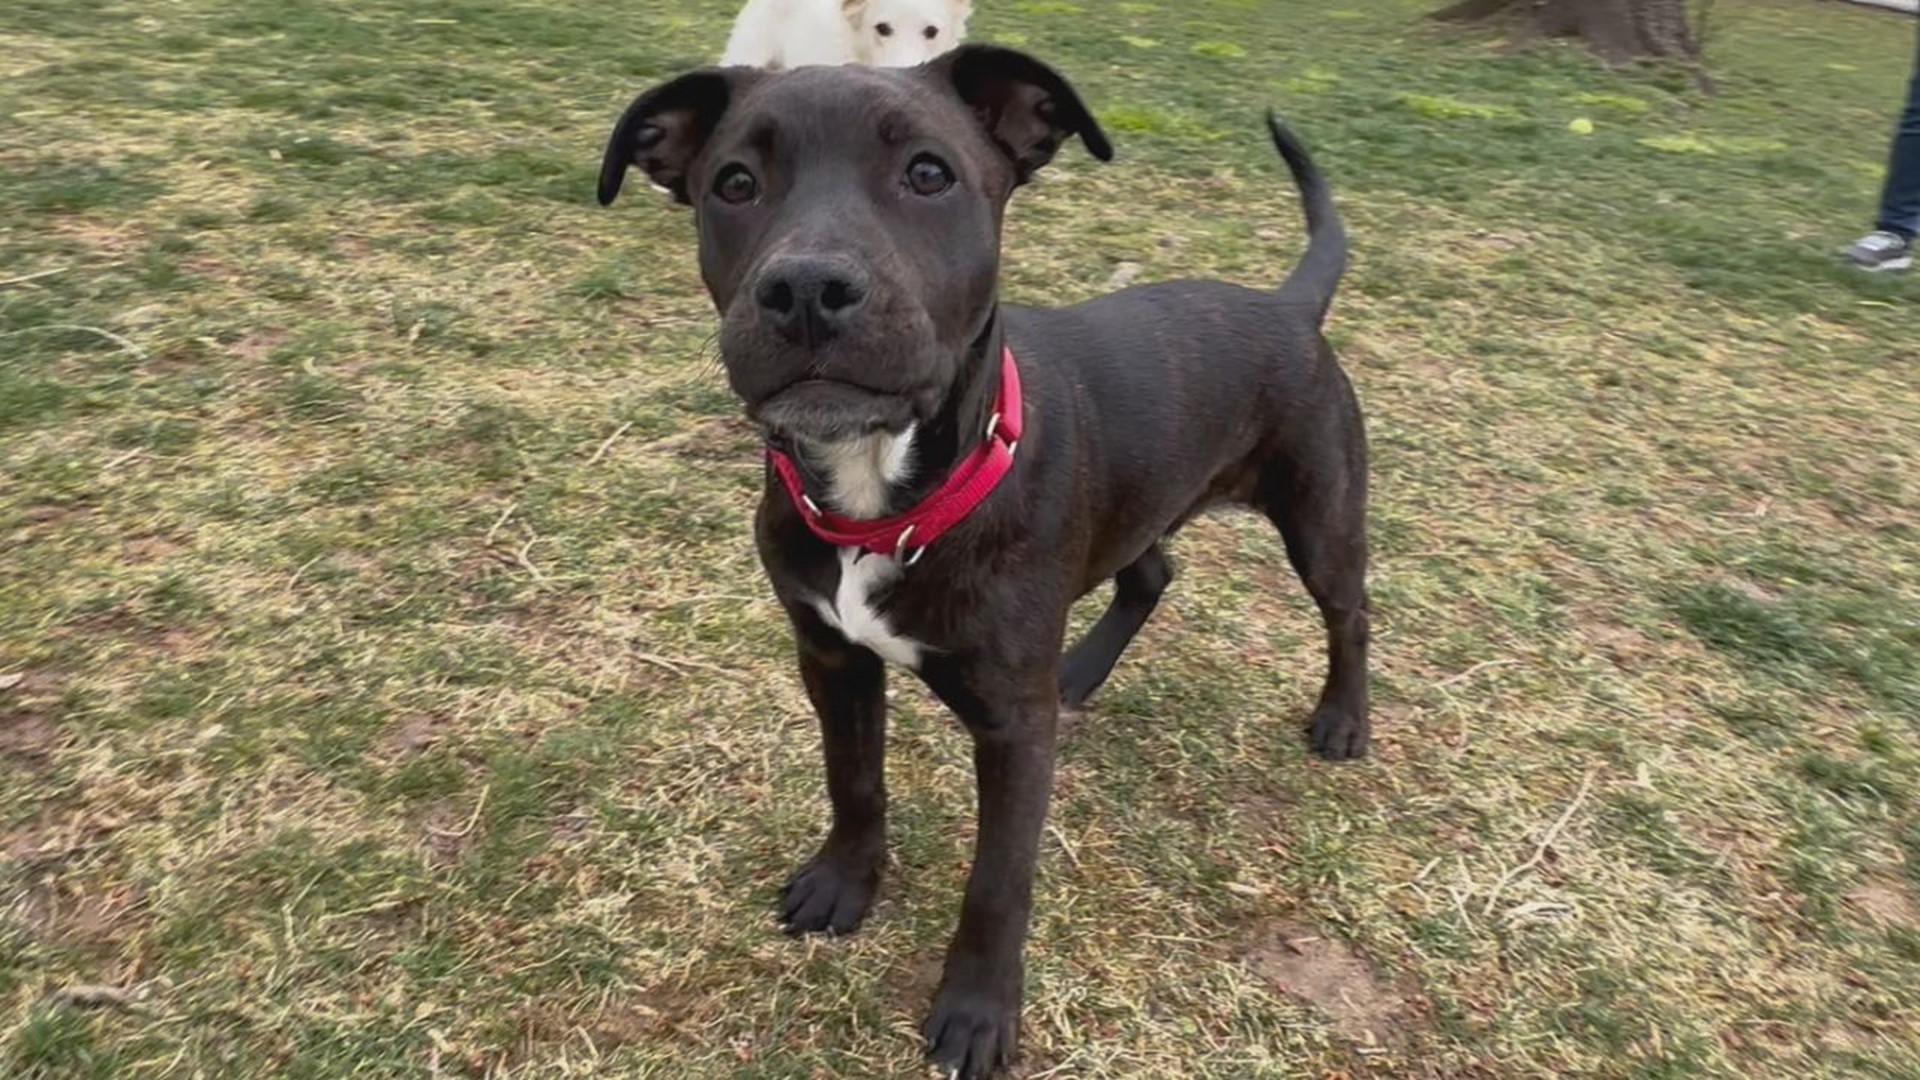 Augustus is an energetic and loving 5 month old mixed breed puppy currently fostered in York County.